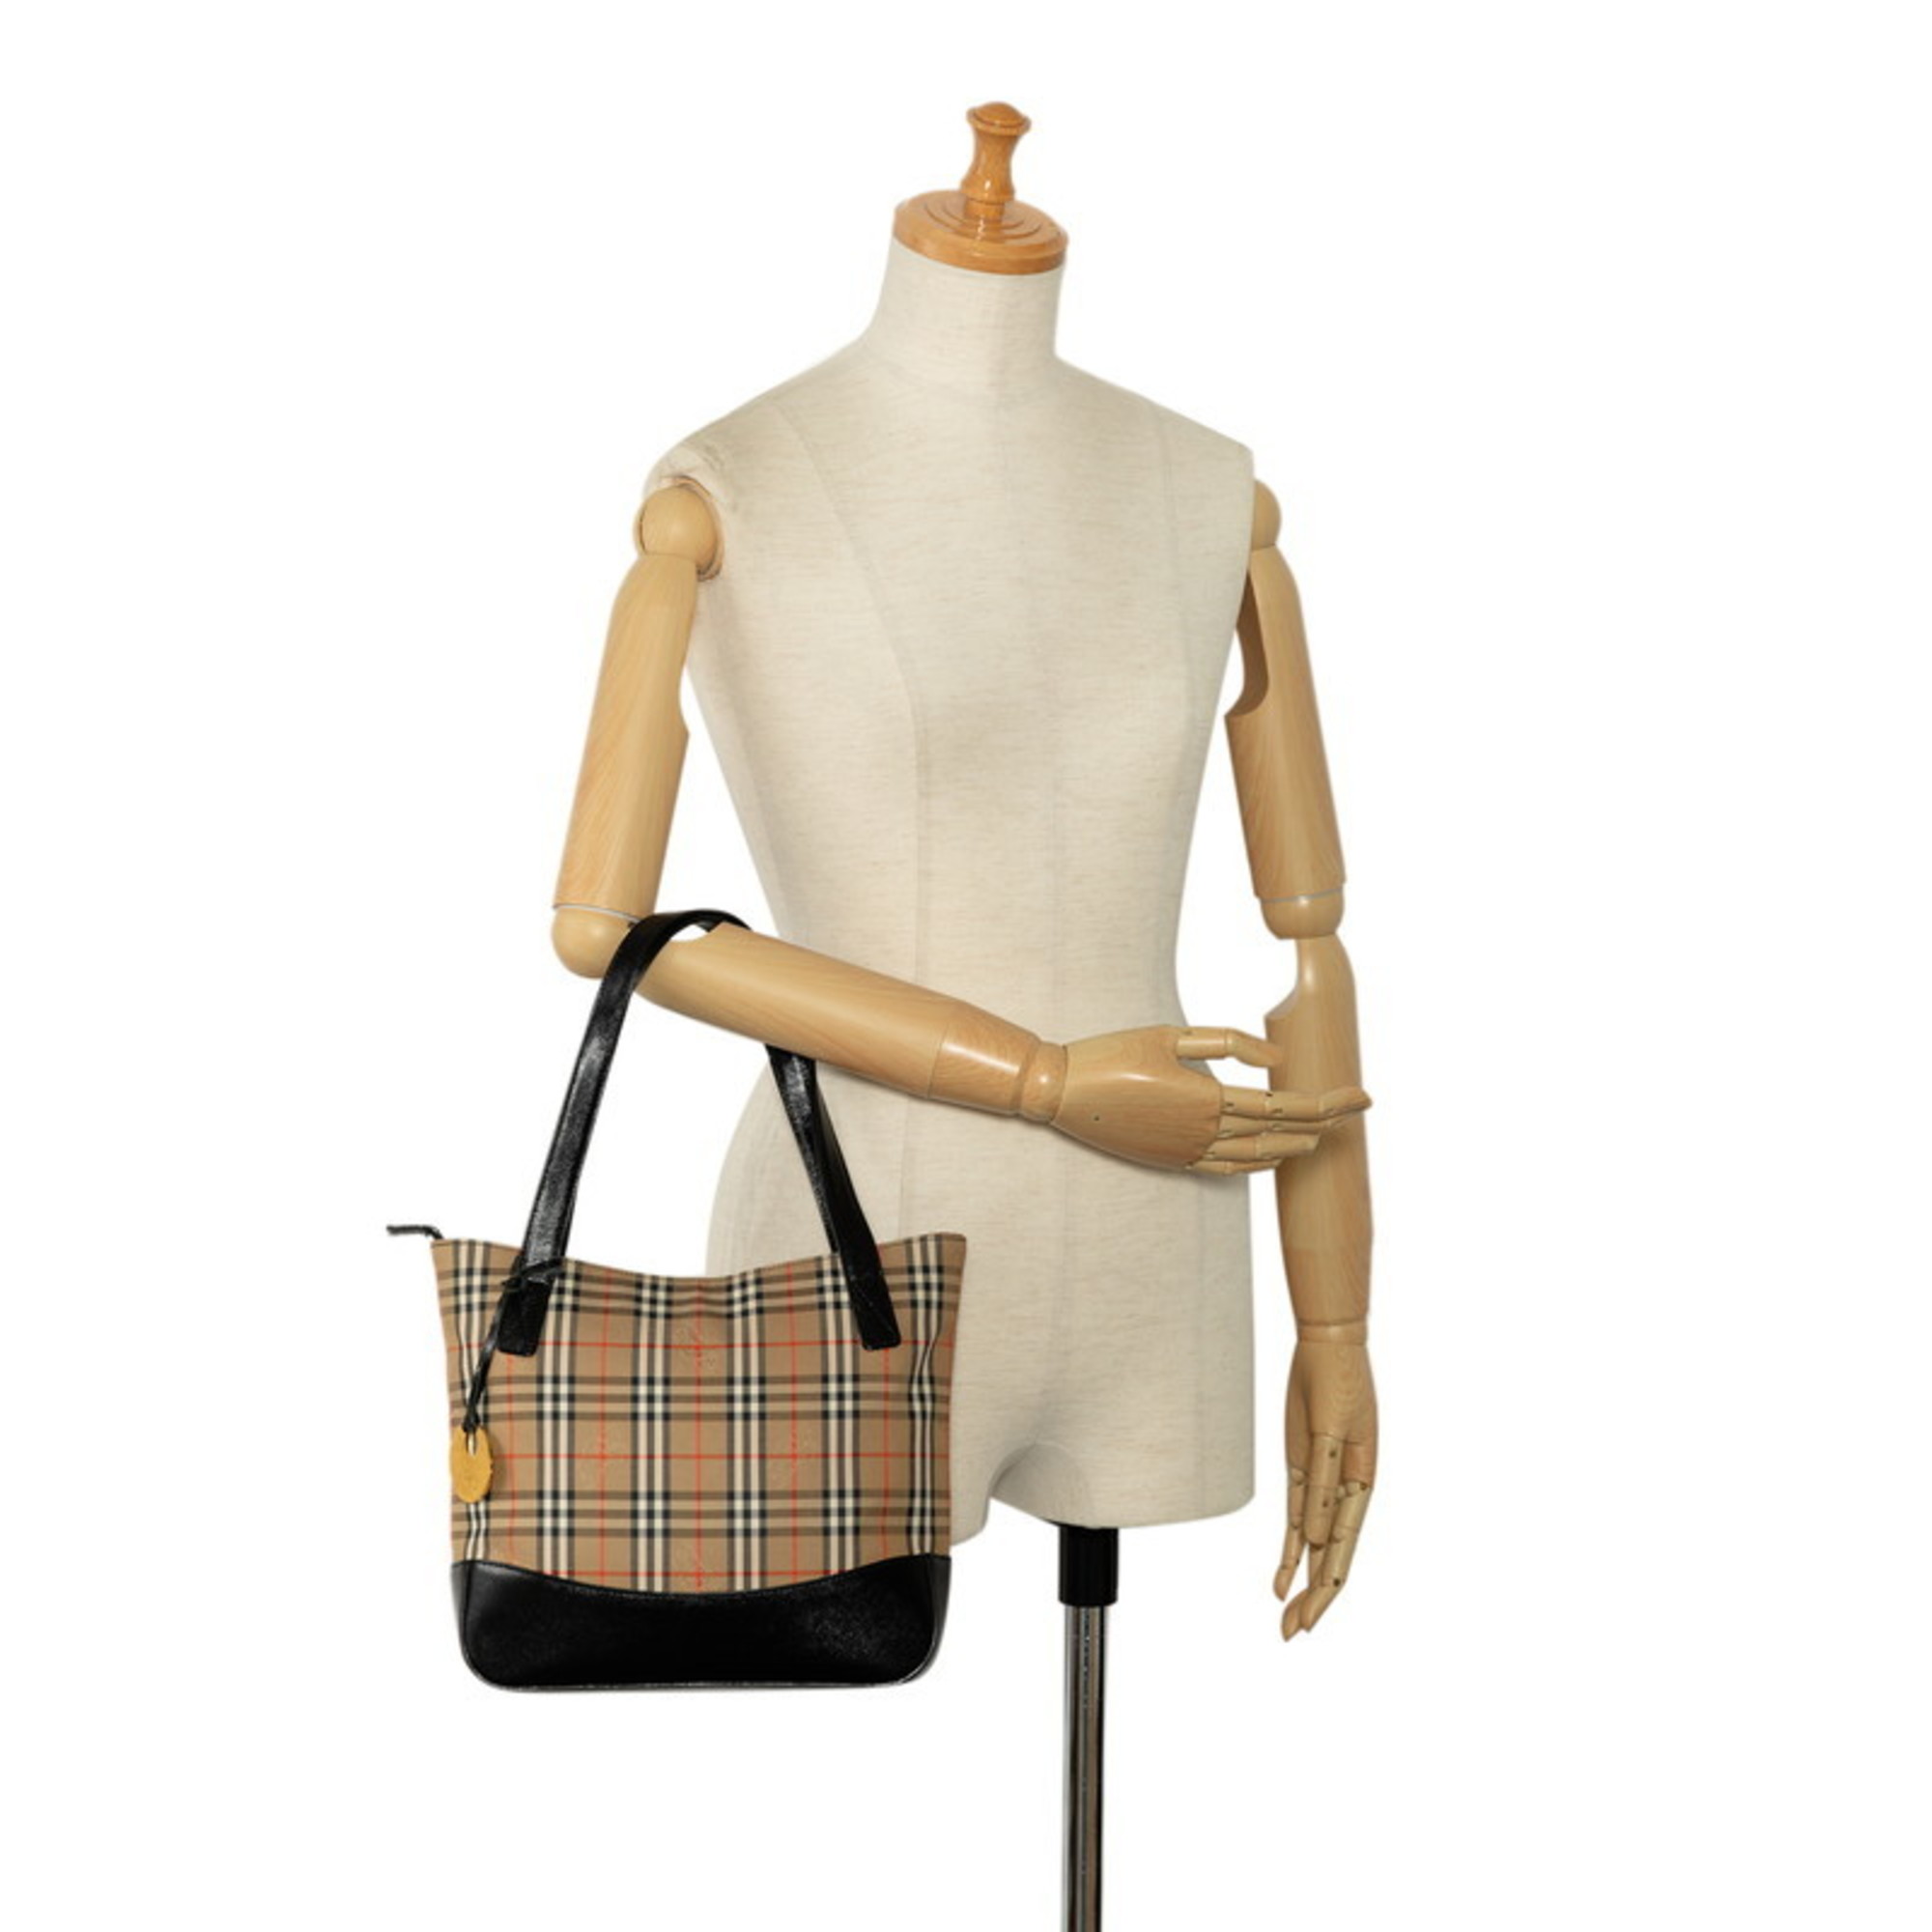 Burberry Nova Check Shadow Horse Tote Bag Beige Brown Canvas Leather Women's BURBERRY